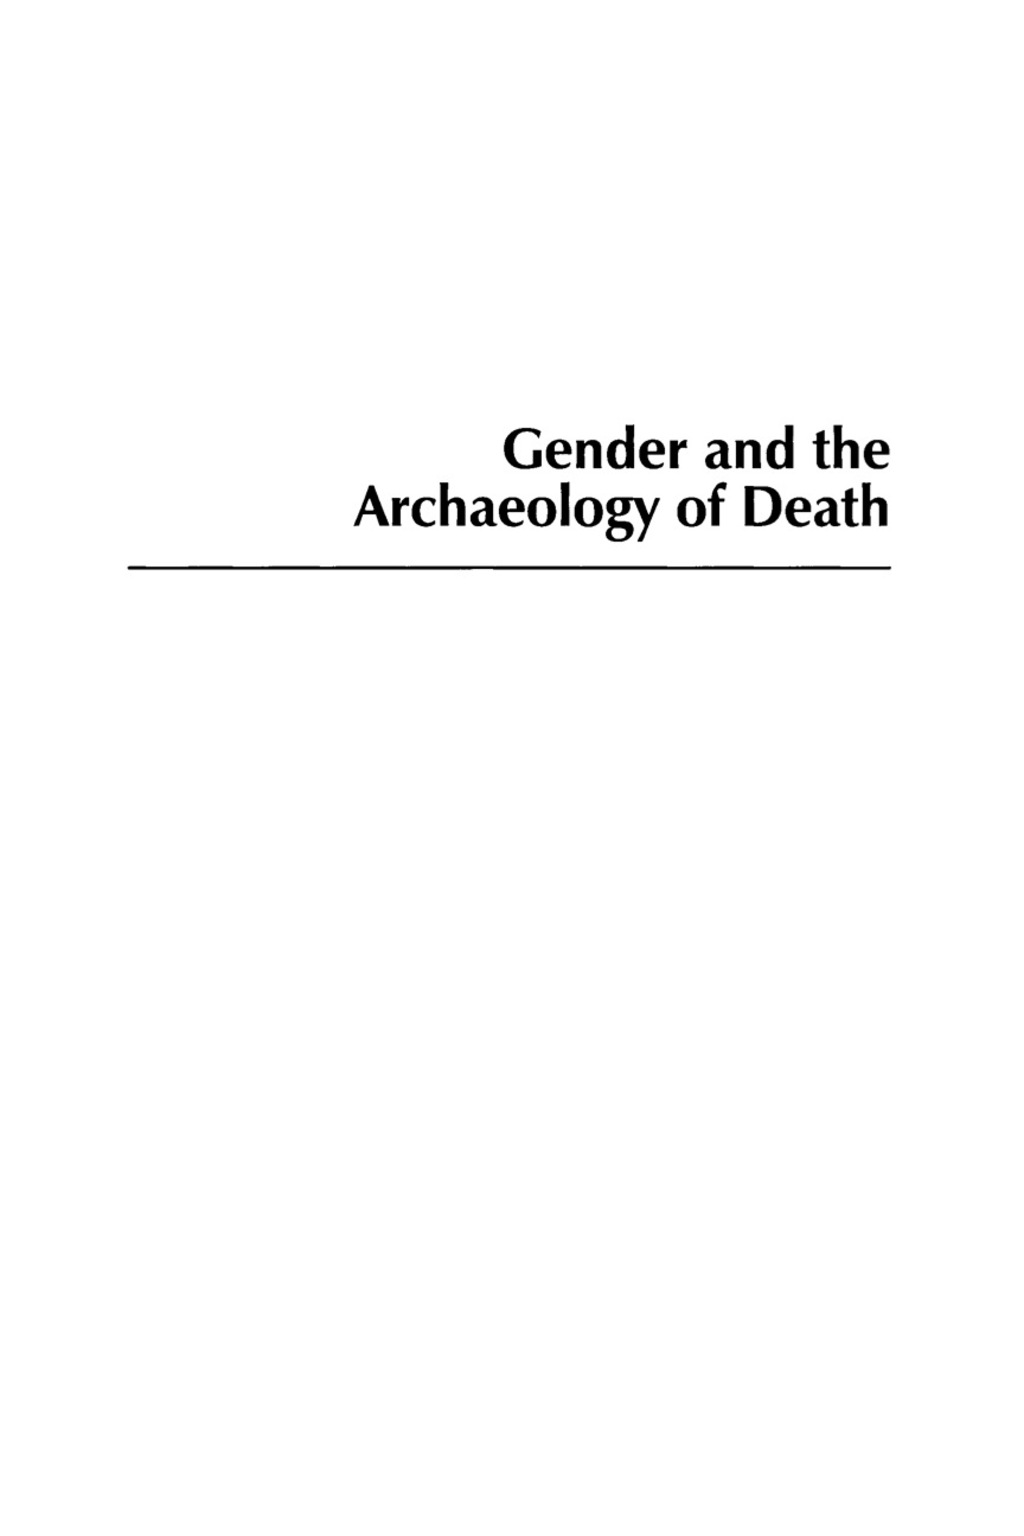 Gender and the Archaeology of Death (eBook) - Bettina Arnold,